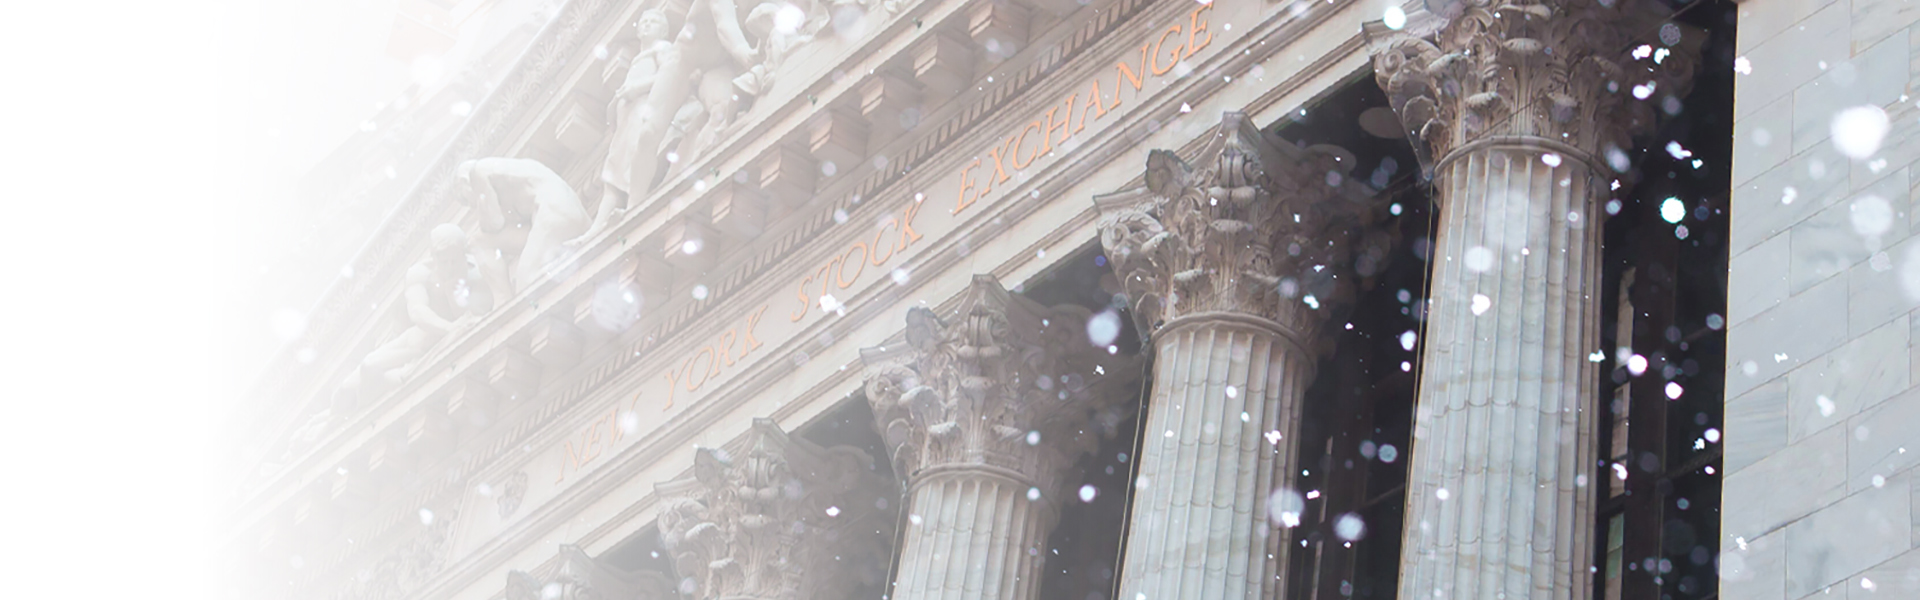 New York Stock Exchange façade with snowflake projections 